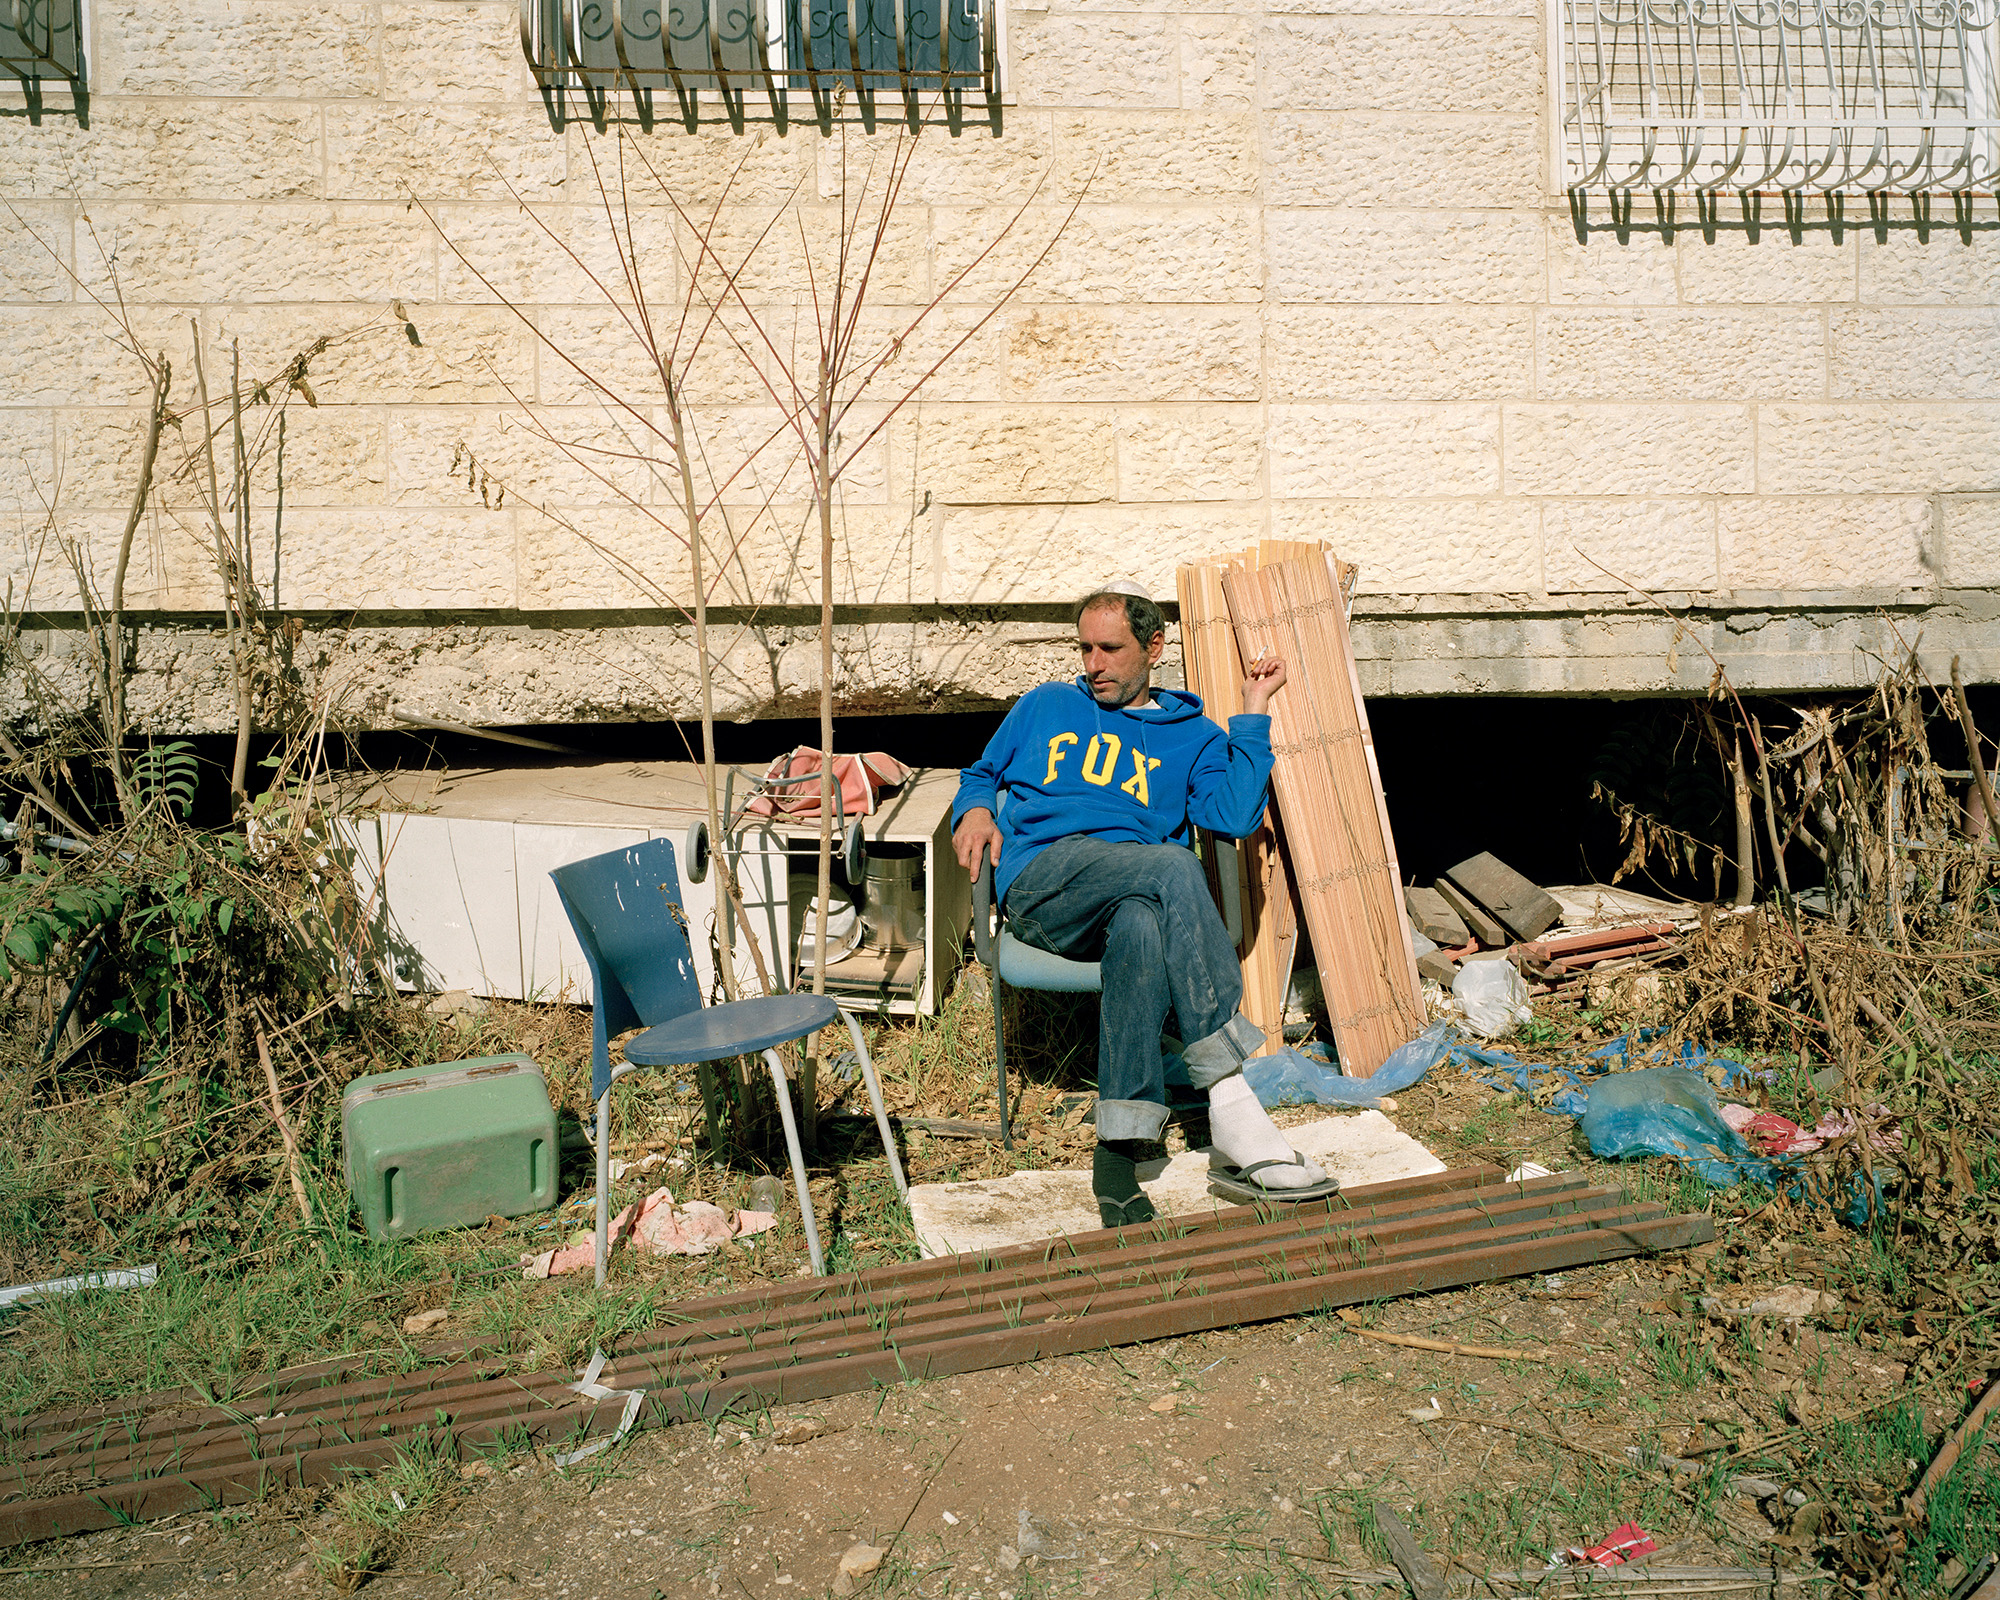 Man sitting in sun behind apartment building surrounded by debris